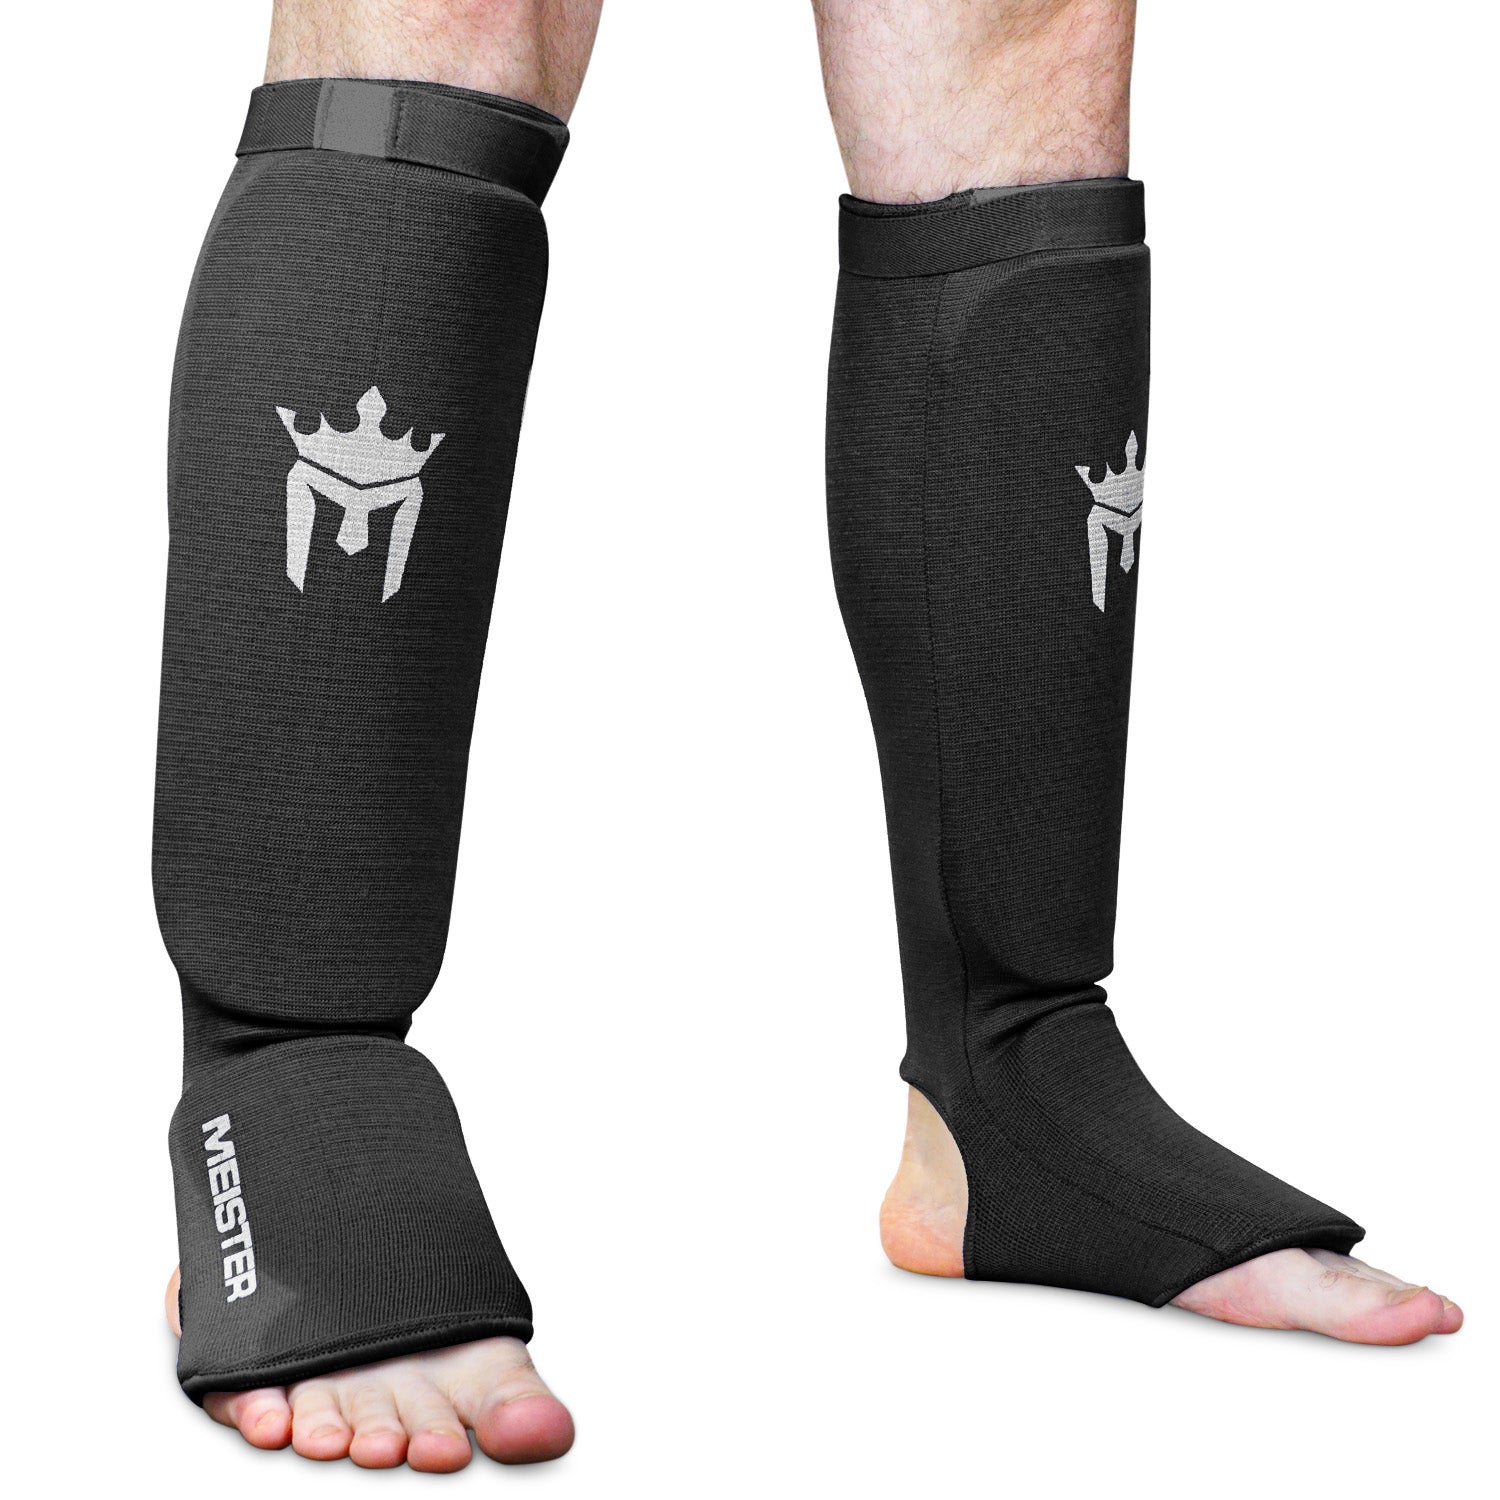 Meister Elastic Cloth Shin & Instep Padded Guards (Pair) - Black